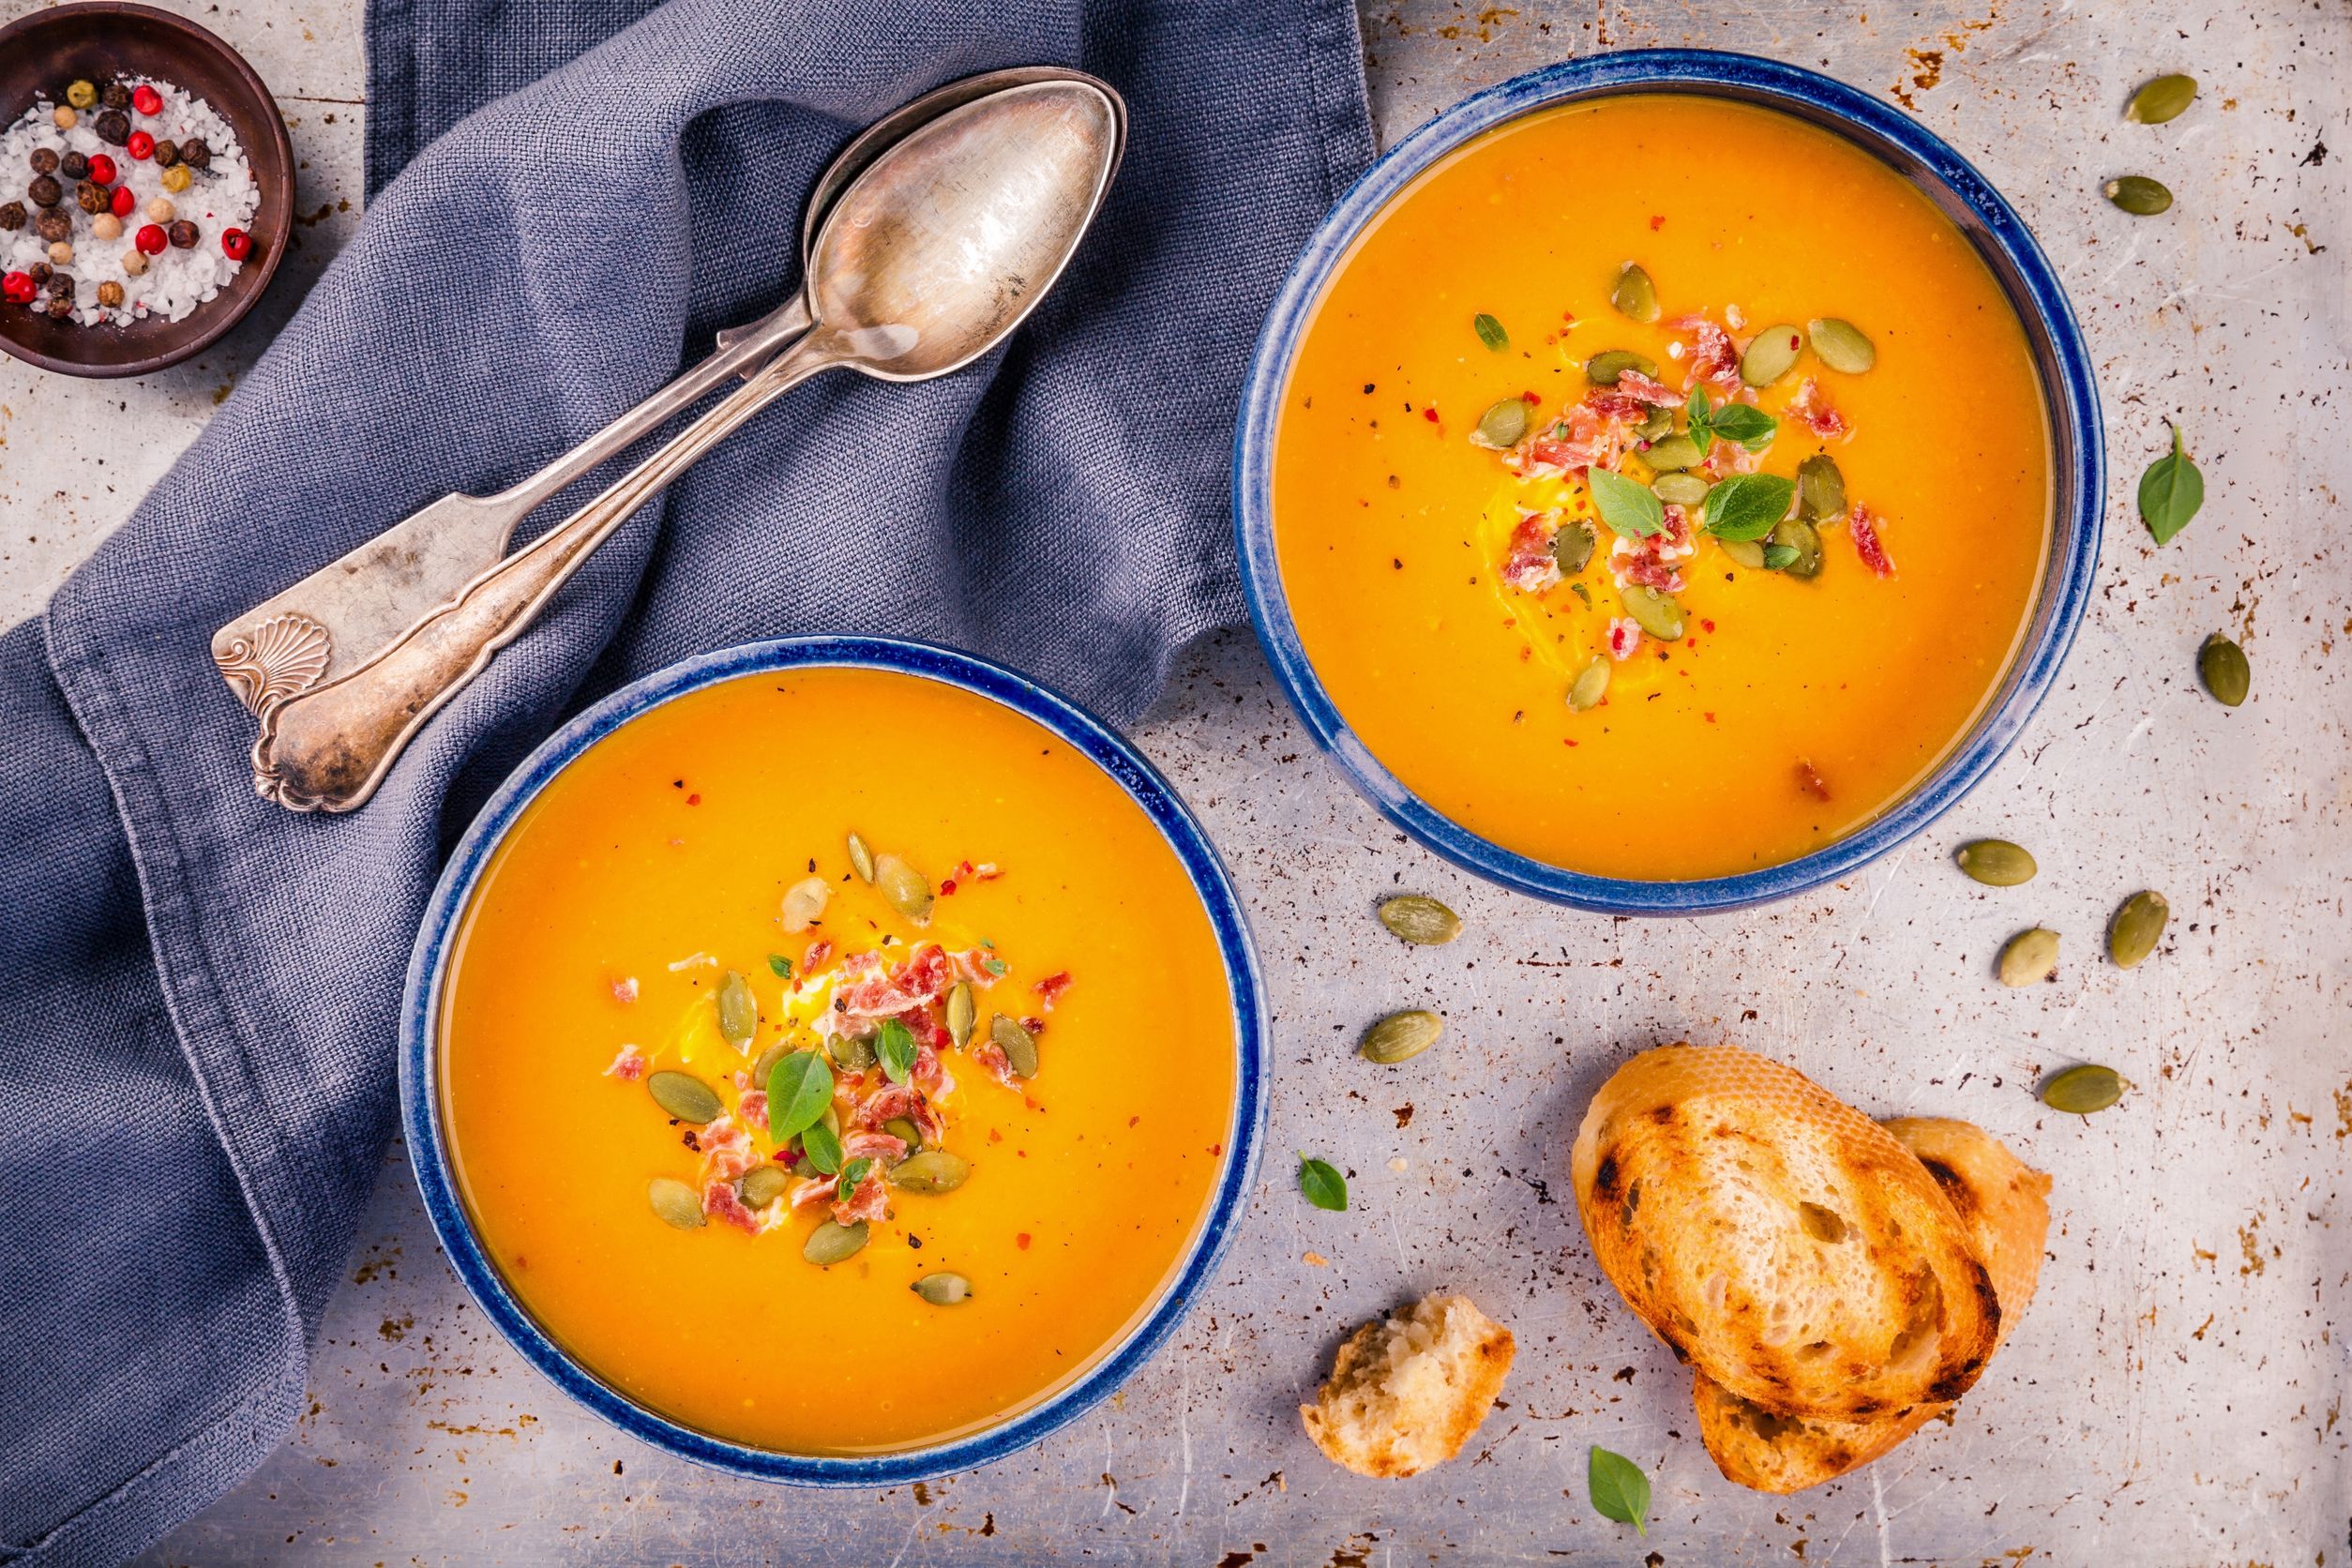 64614934 - homemade autumn butternut squash soup with pumpkin seeds, bacon and basil on rustic background